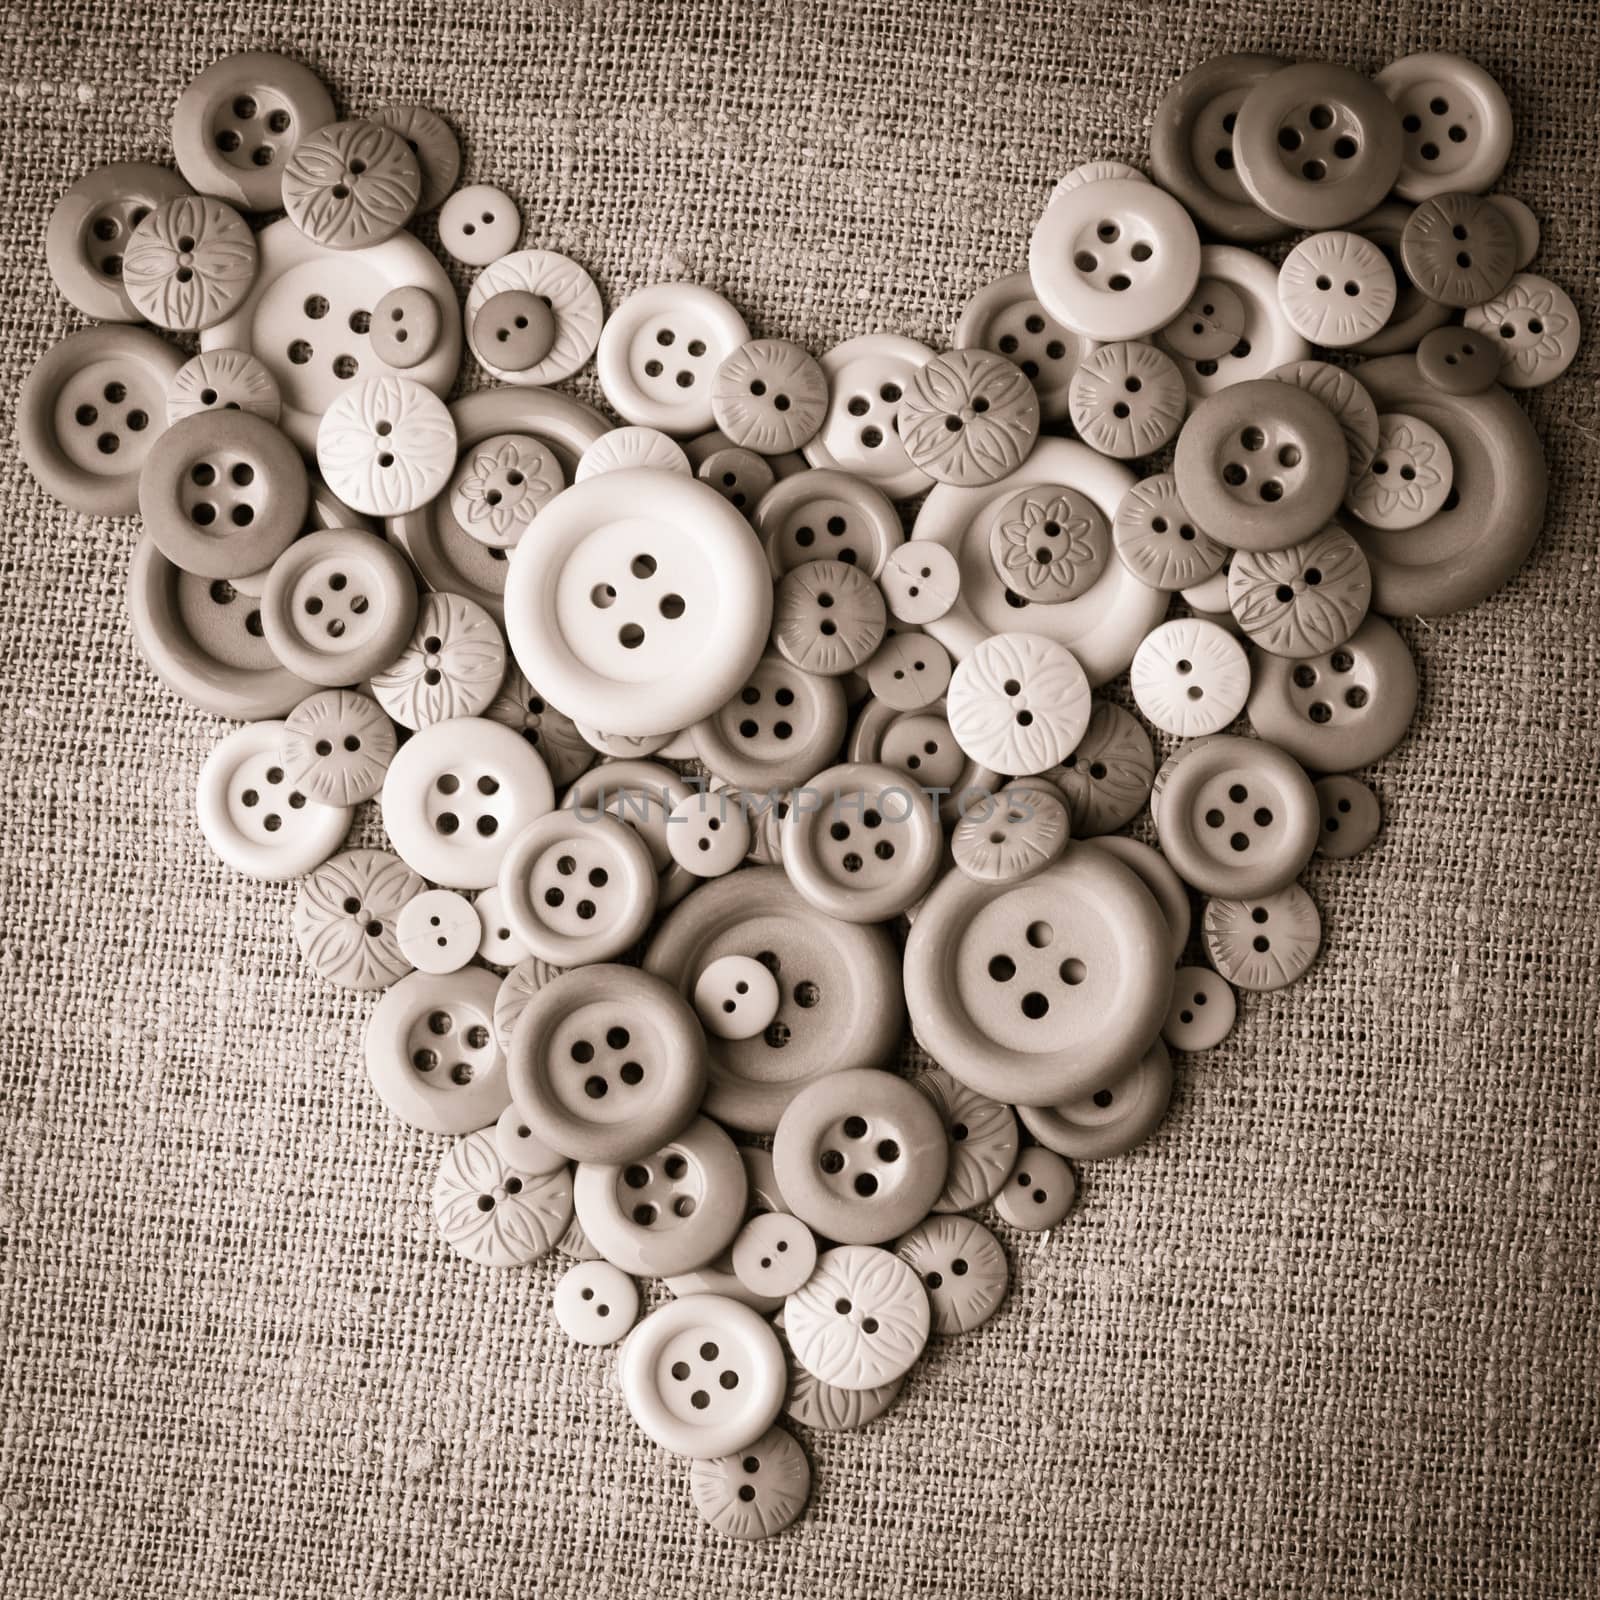 Heart shape from wooden buttons over canvas textile